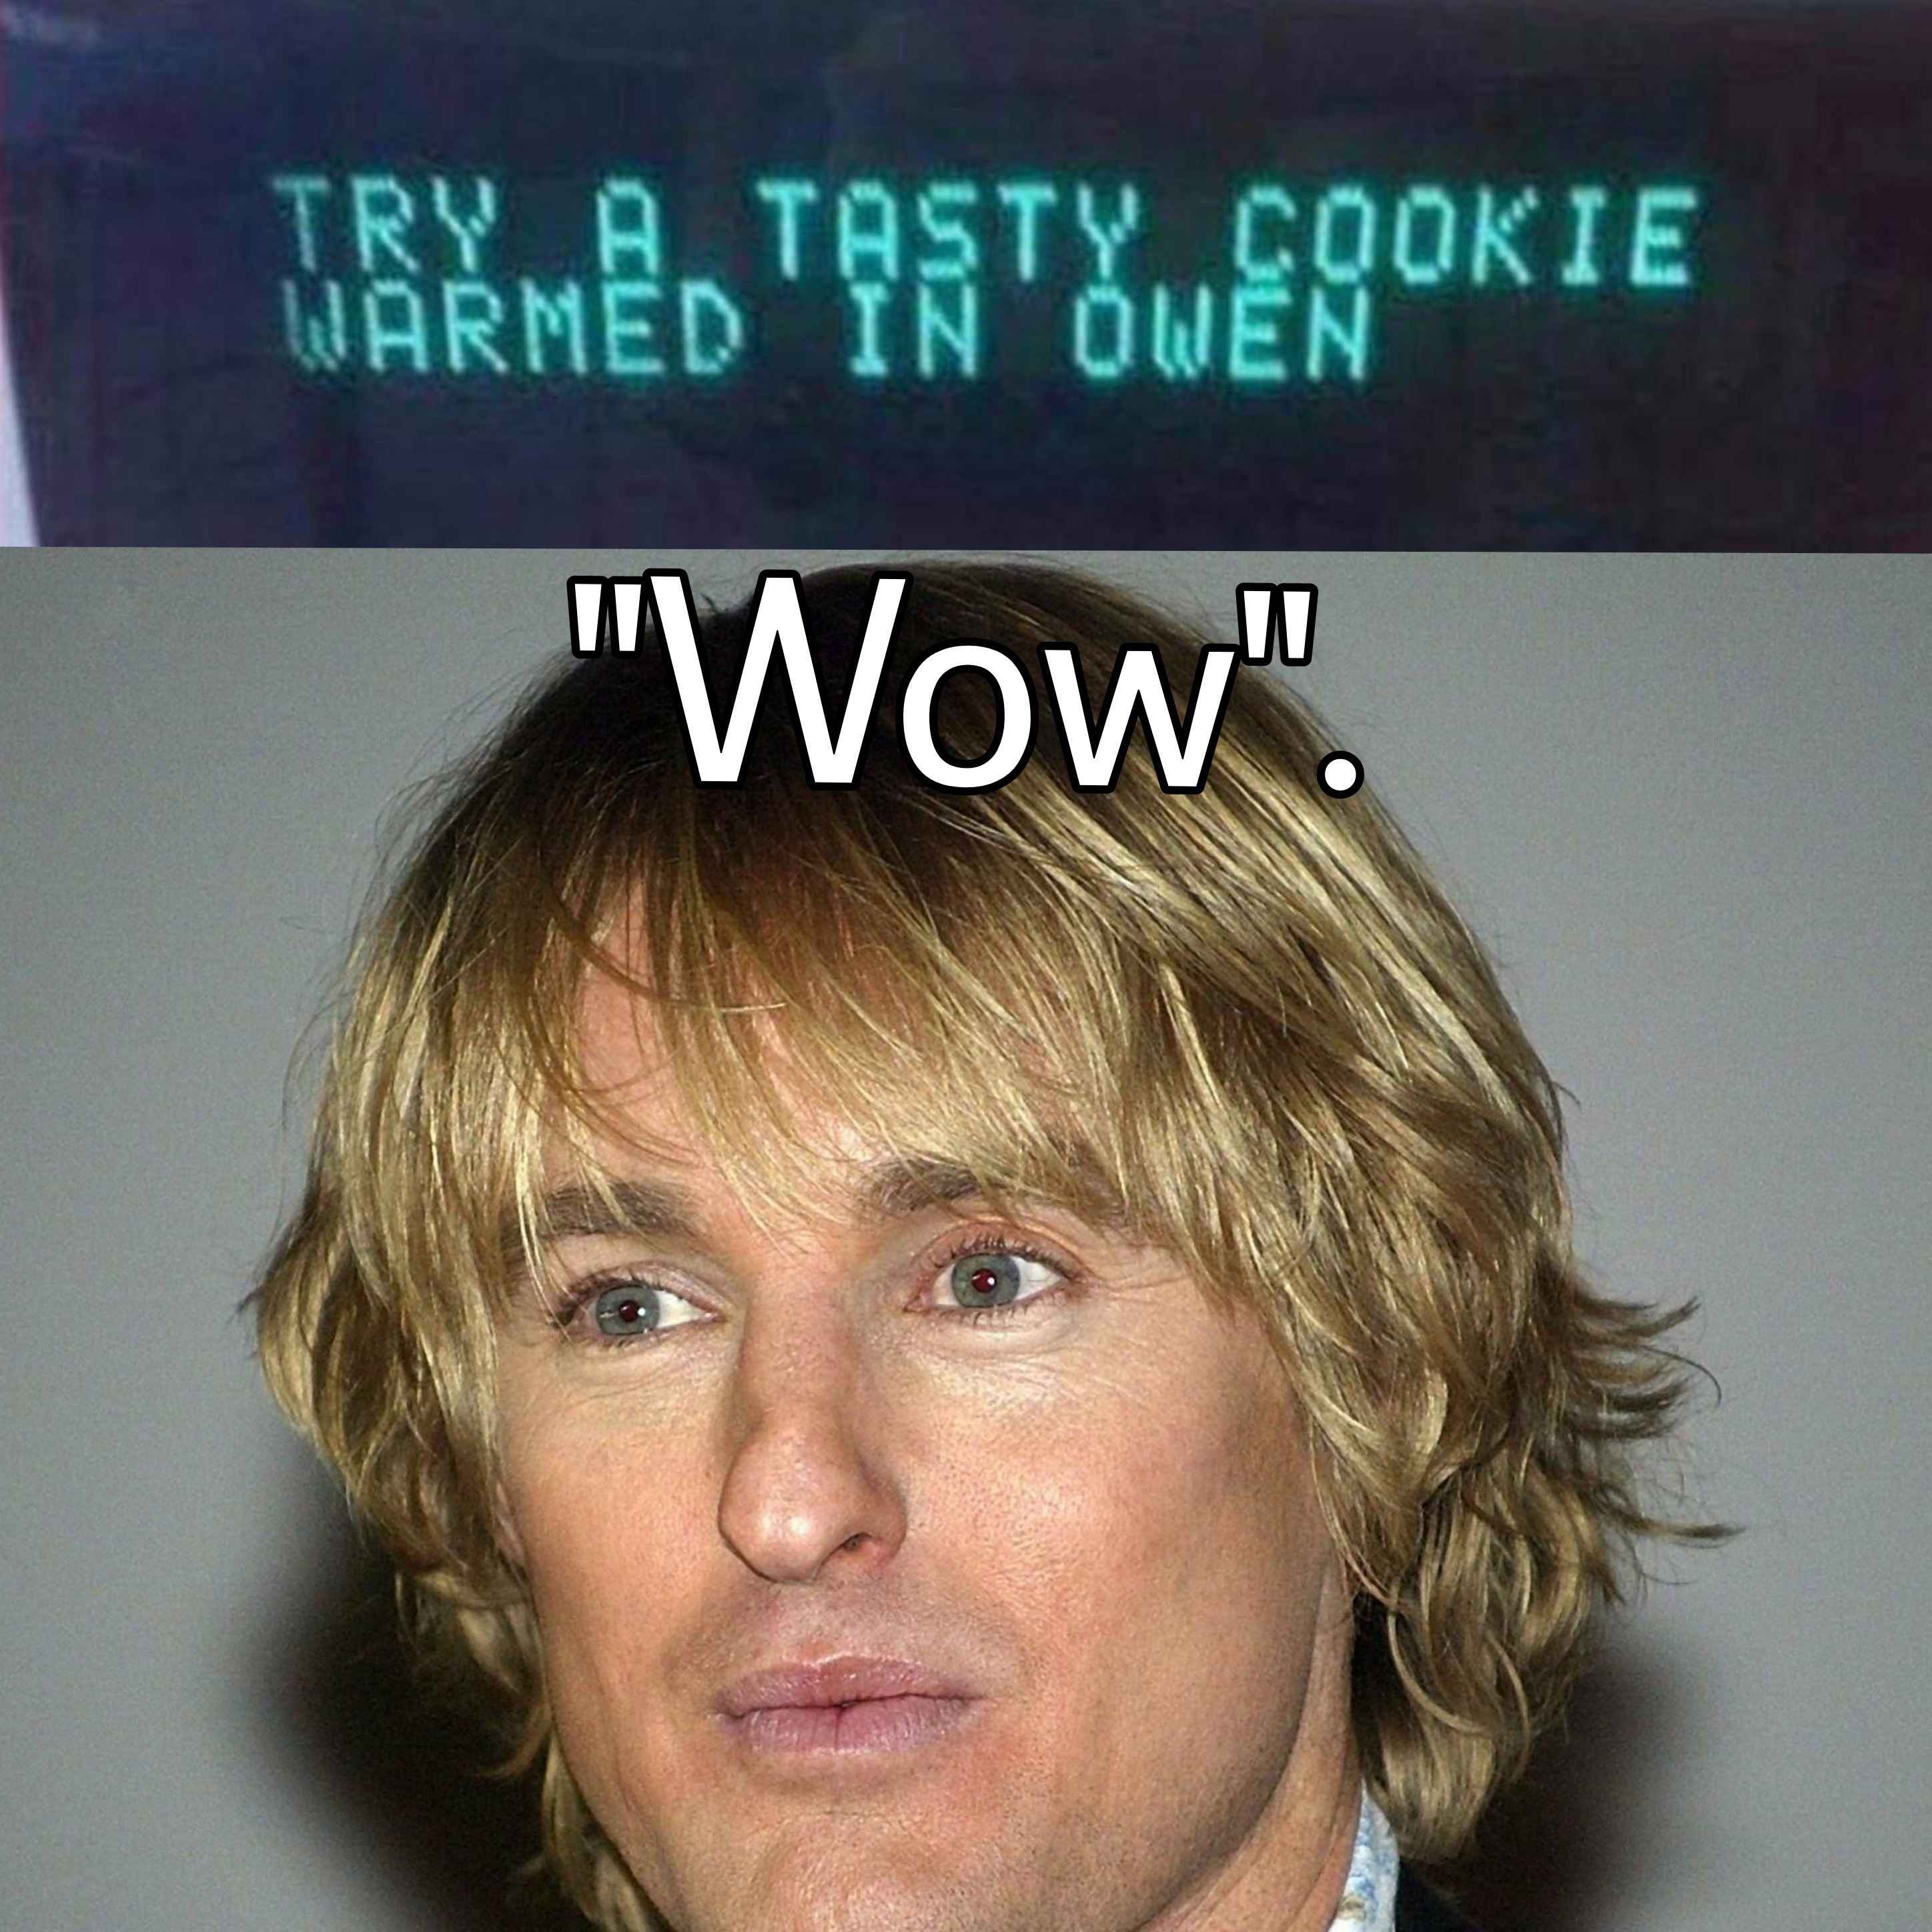 don t want - Try A Tasty Cookie Warmed In Owen "Wow".